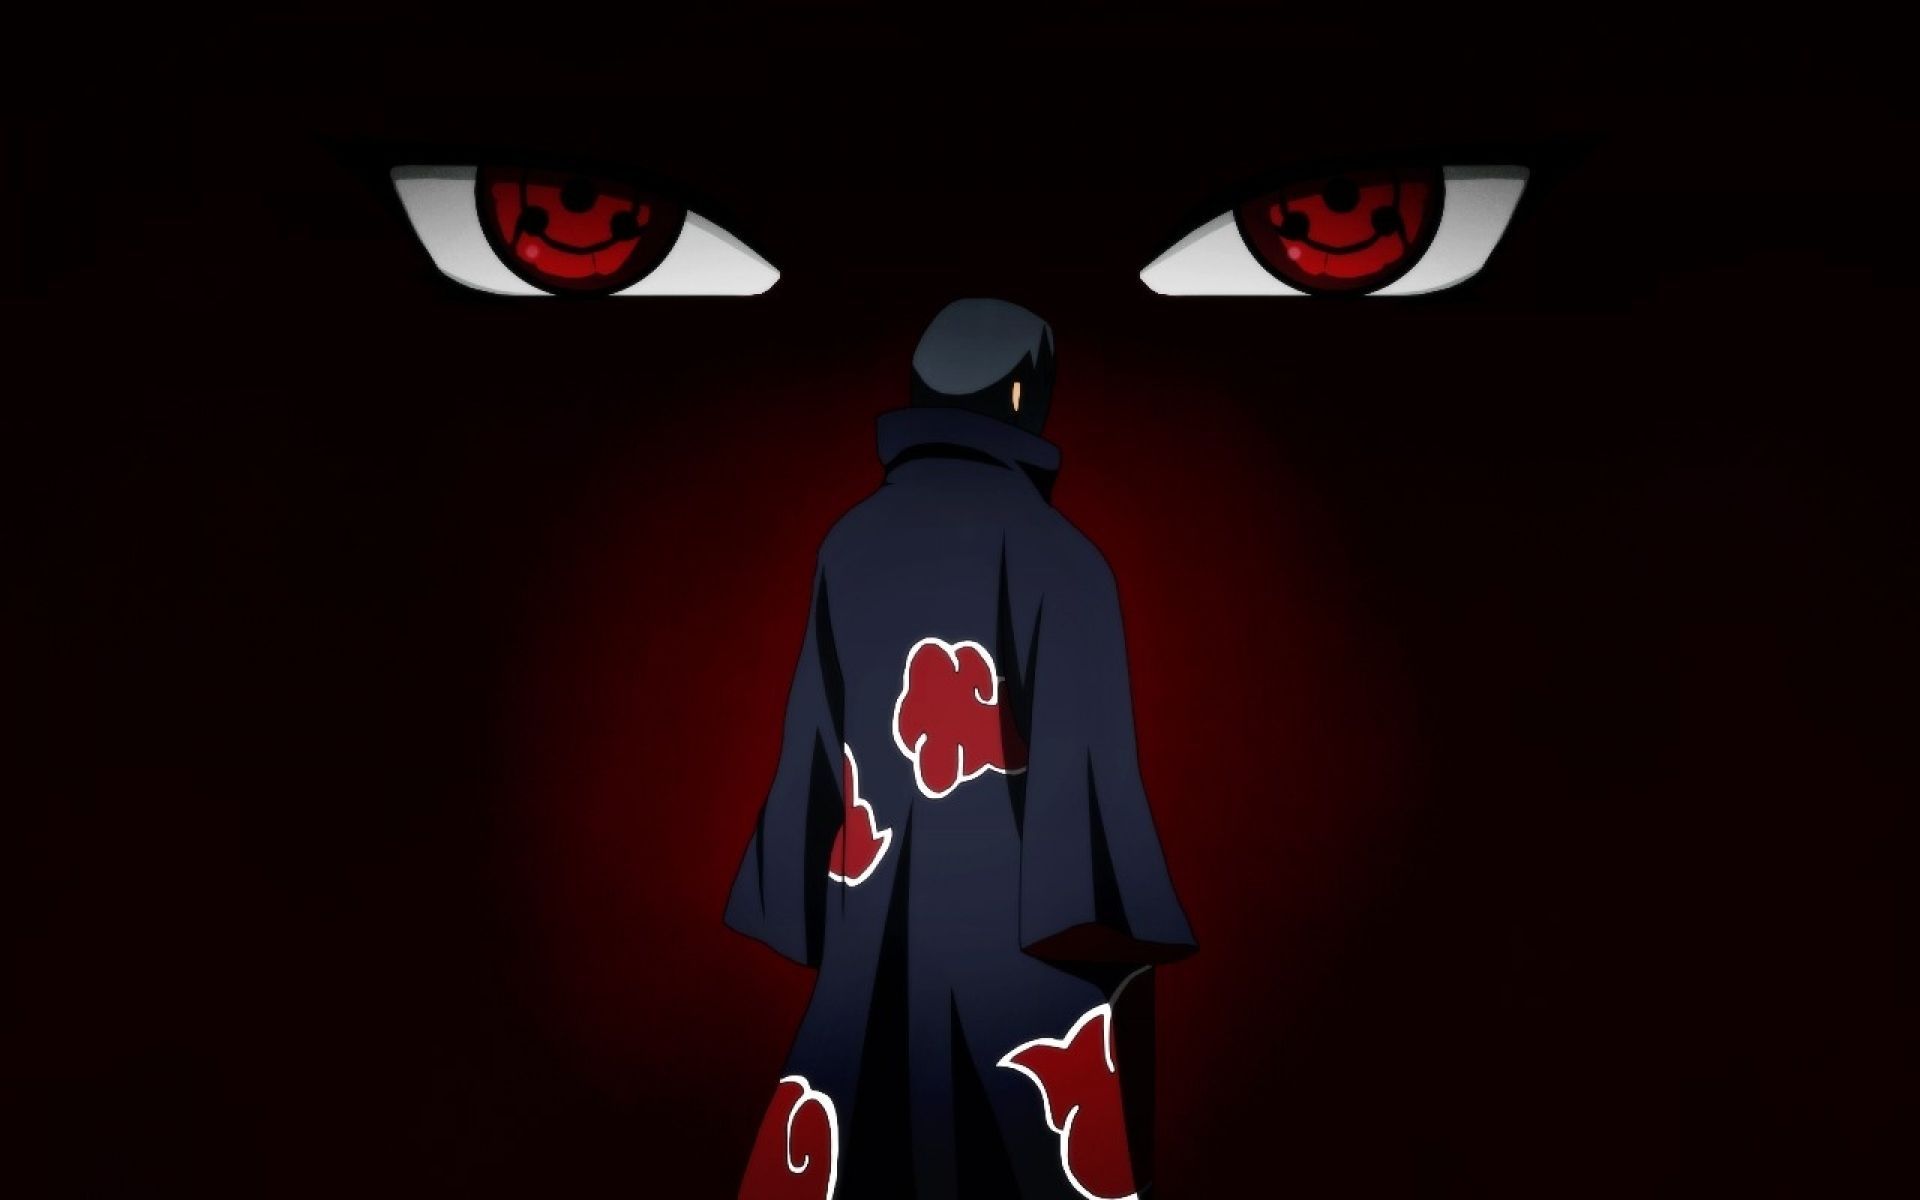 Ps4 Wallpaper Itachi Itachi Wallpaper 4k Mobile Support Us By Sharing The Content Upvoting Wallpapers On The Page Or Sending Your Own Background Pictures Srkshnngkwnml